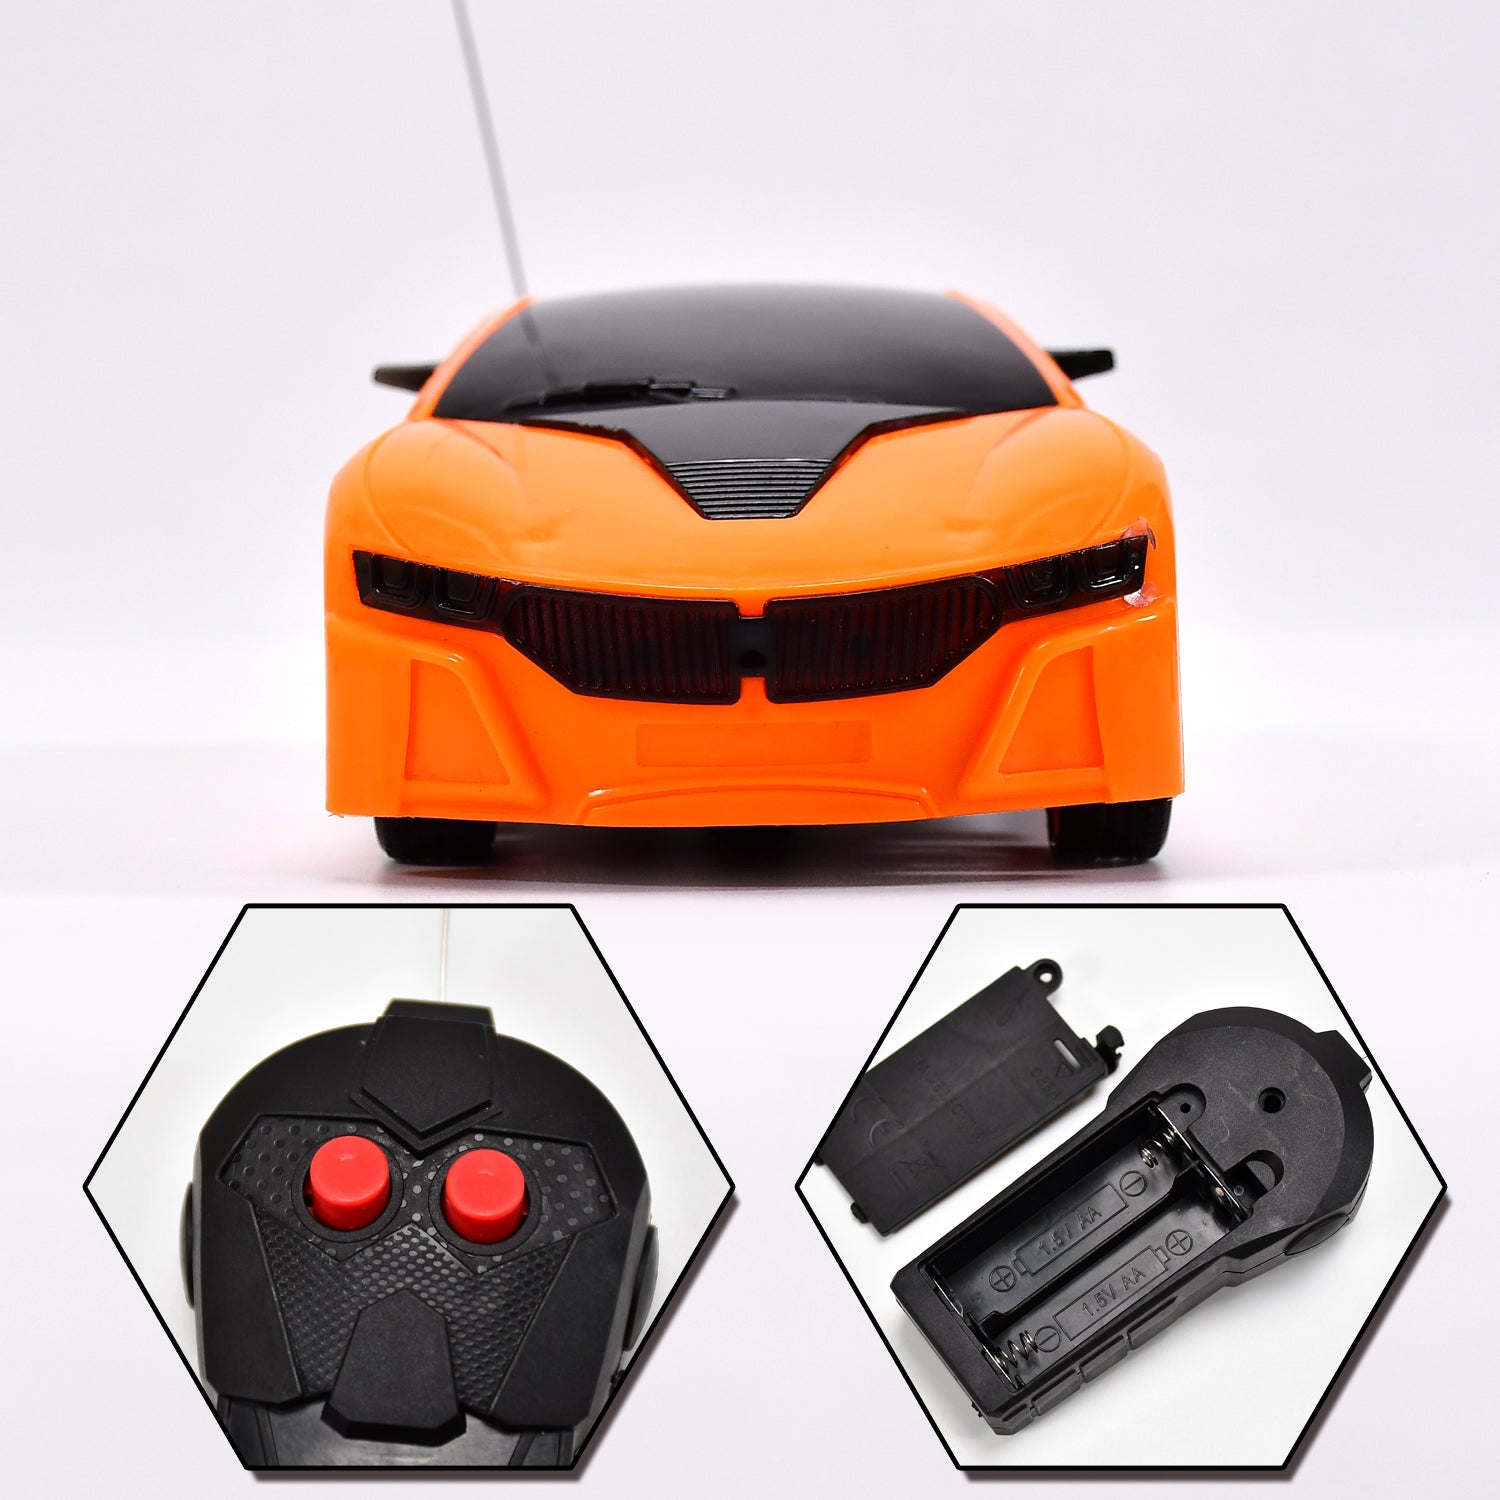 4451 Remote Control Fast Modern Racing Car 3D Light with Go Forward And Backward 